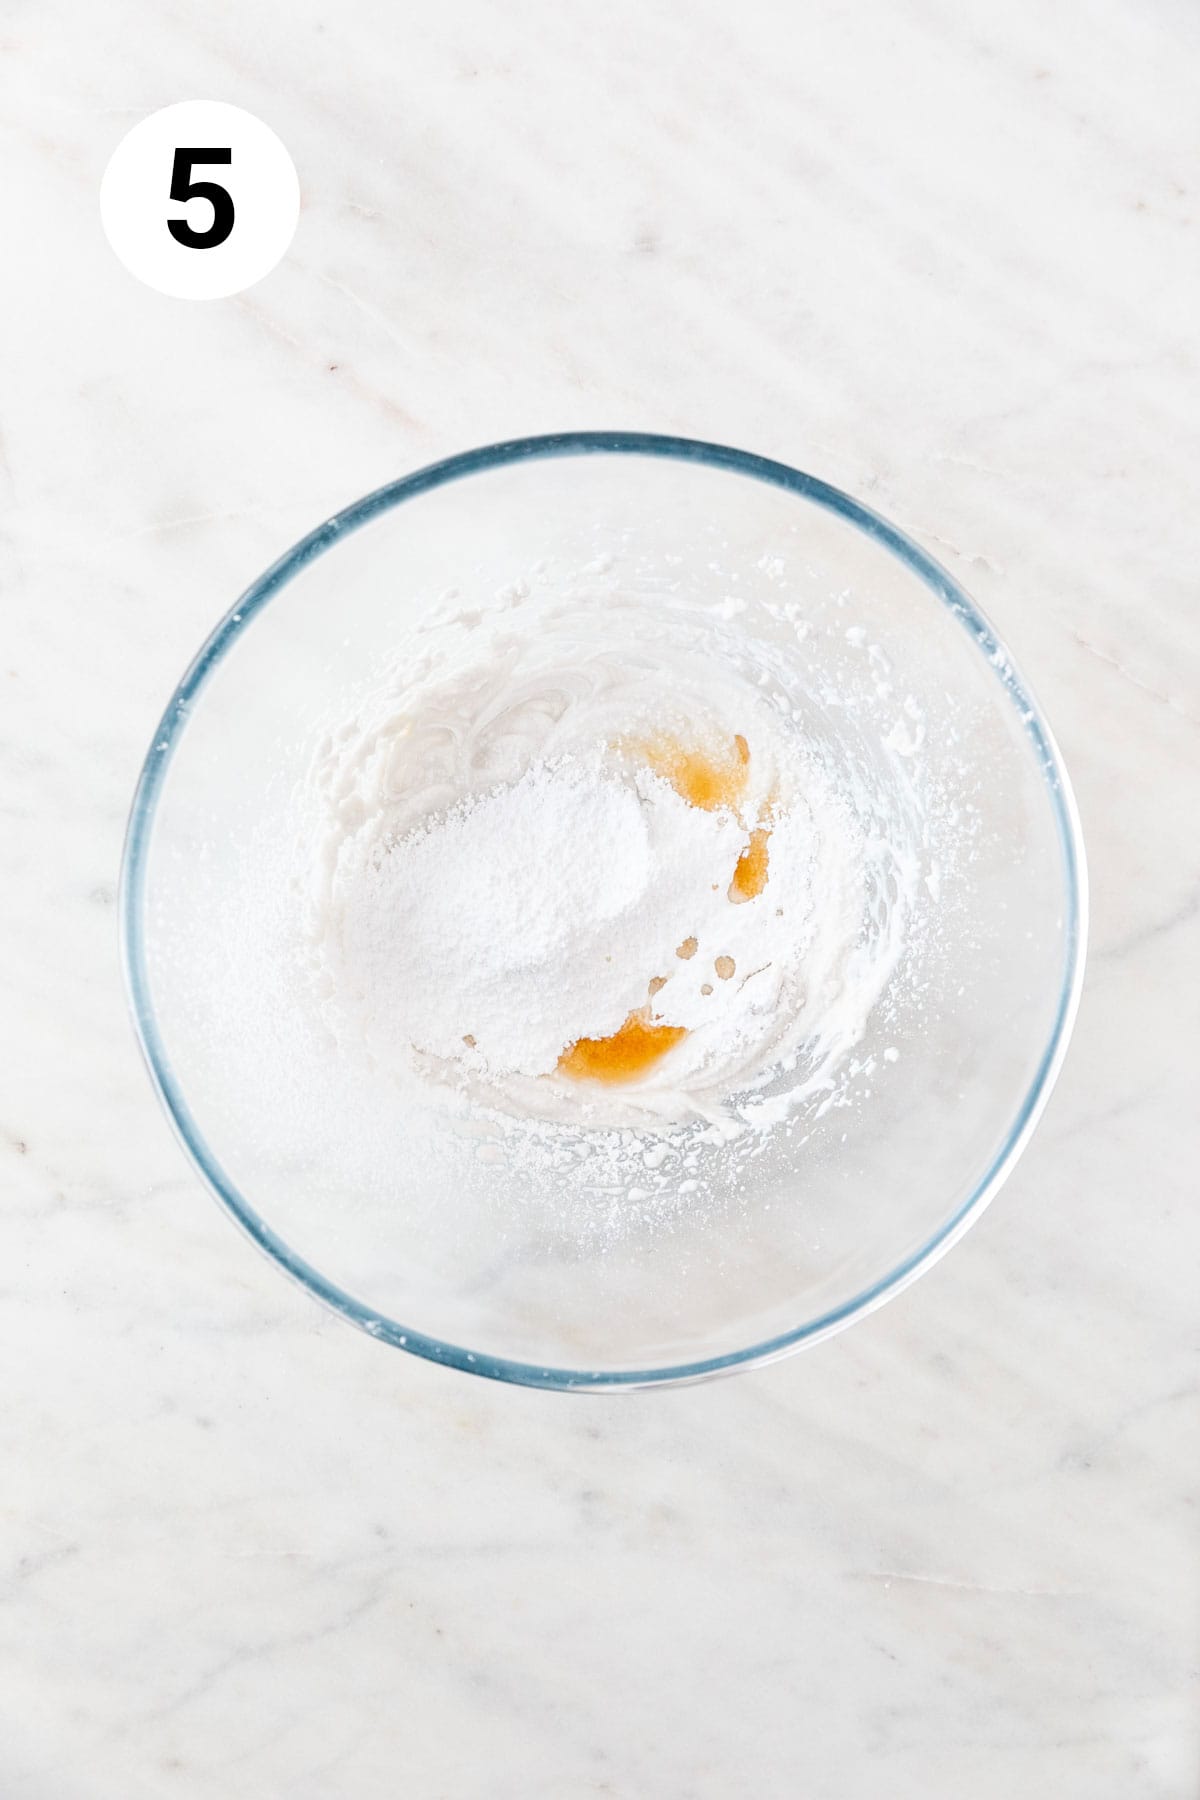 Whipped coconut cream, powdered sugar, and vanilla extract in a large mixing bowl.